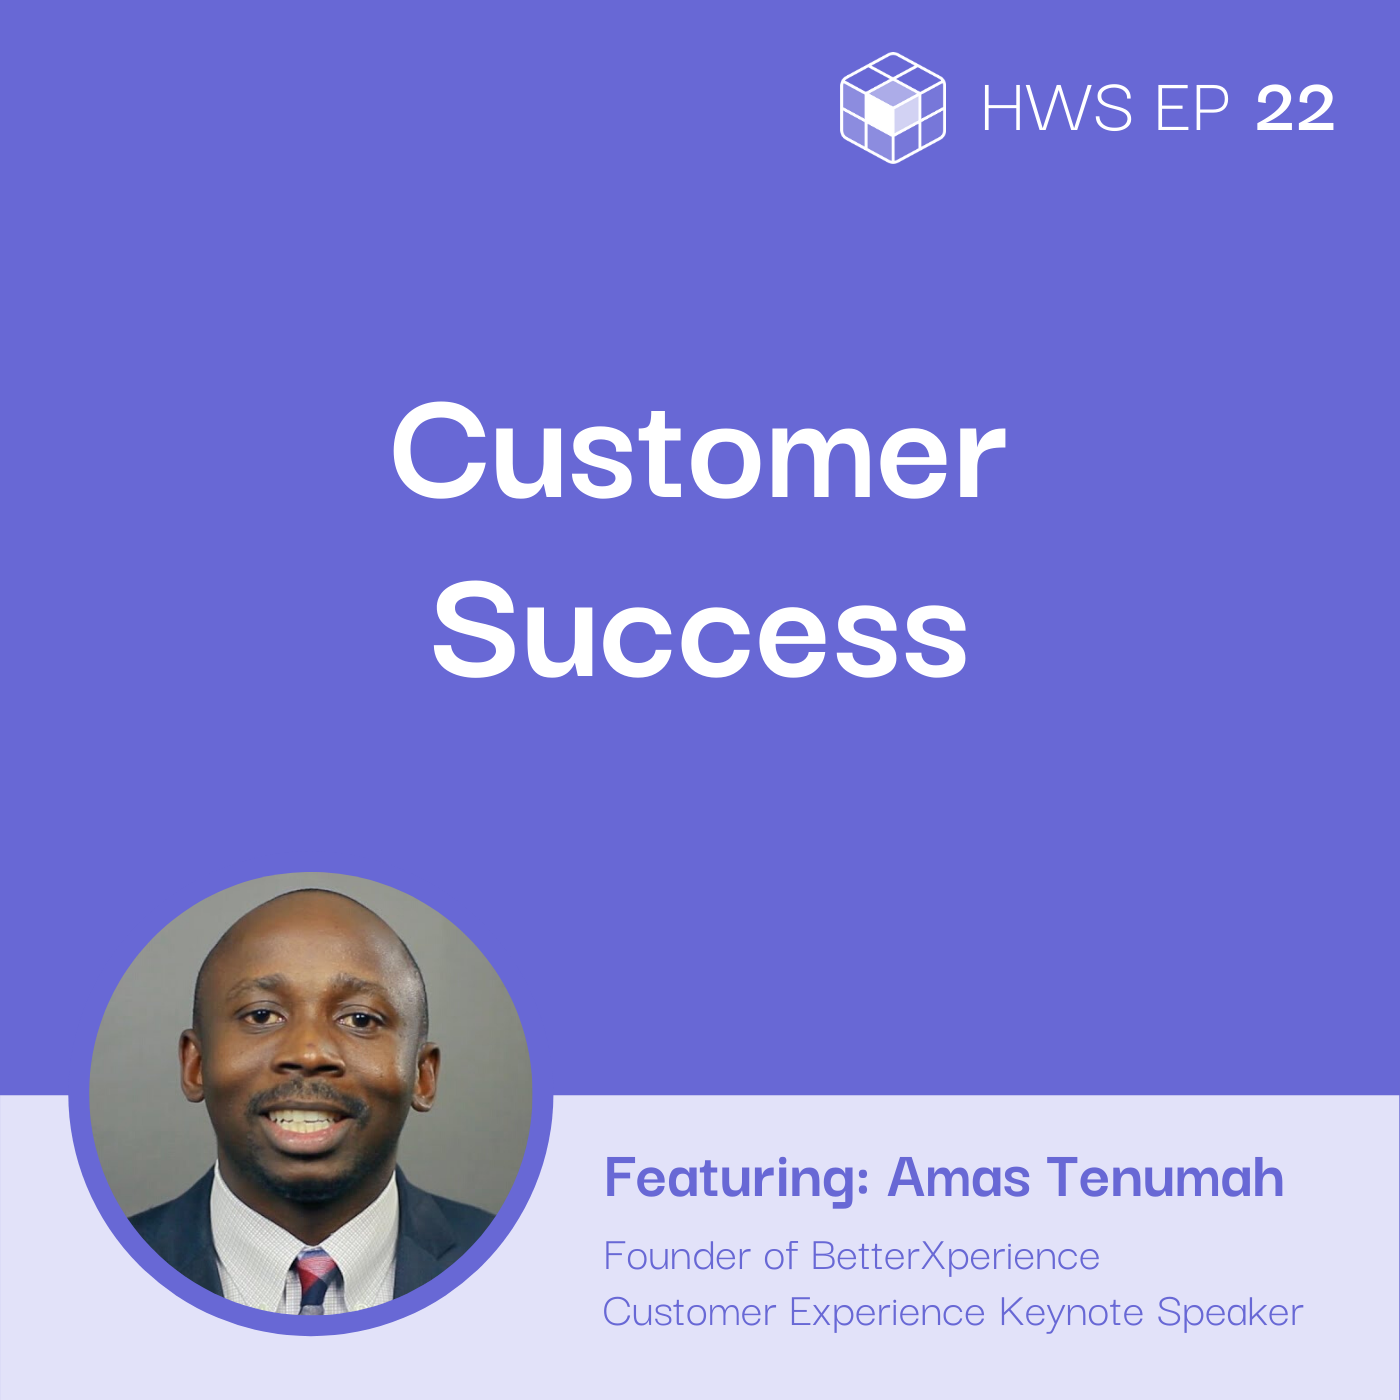 Amas Tenumah shares how to impact customer sentiment and based on that improve customer experience for your business